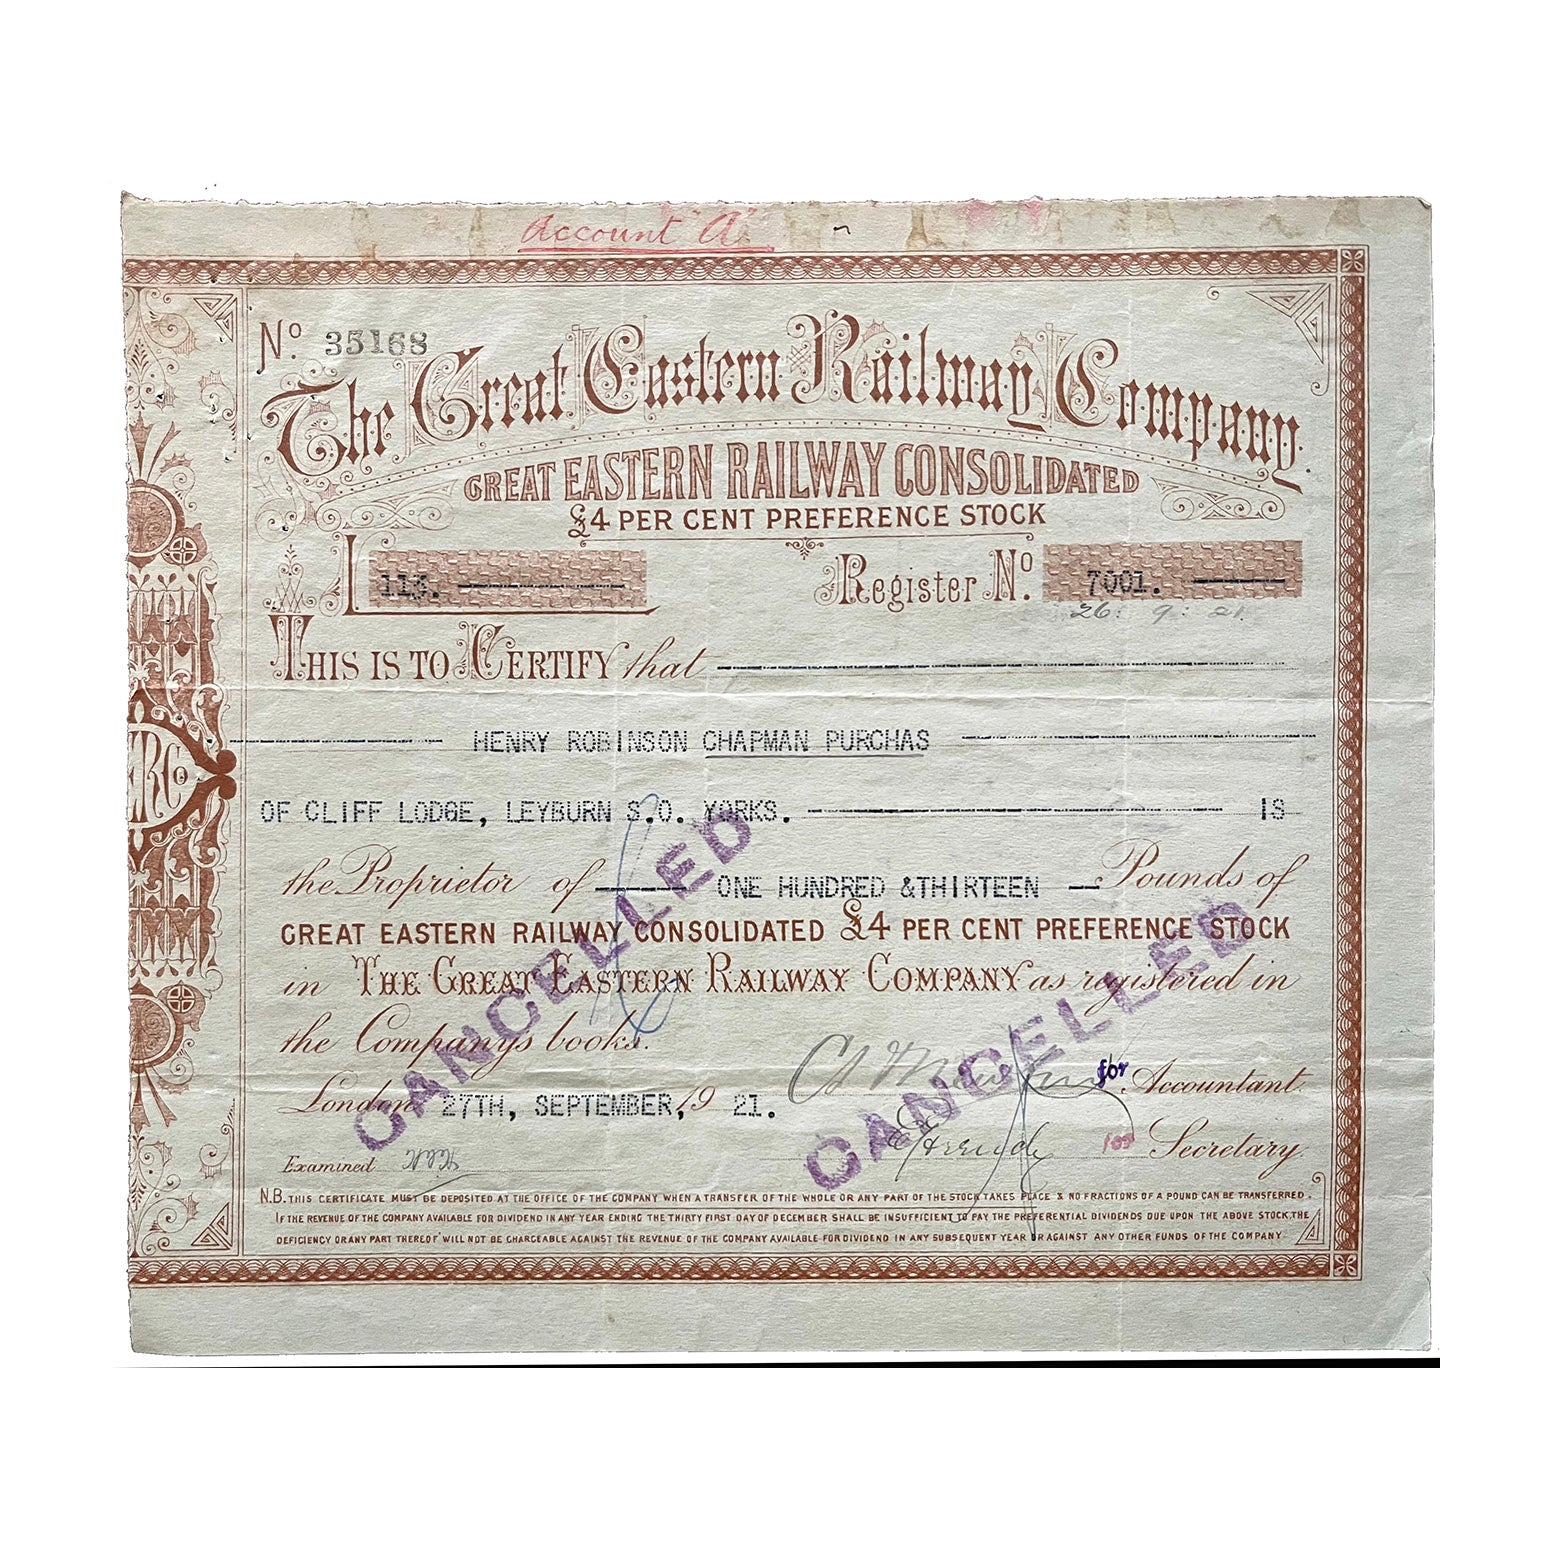 railway share certificate, Great Eastern Railway Company, 4% Preference Stock, £113, issued 1921.